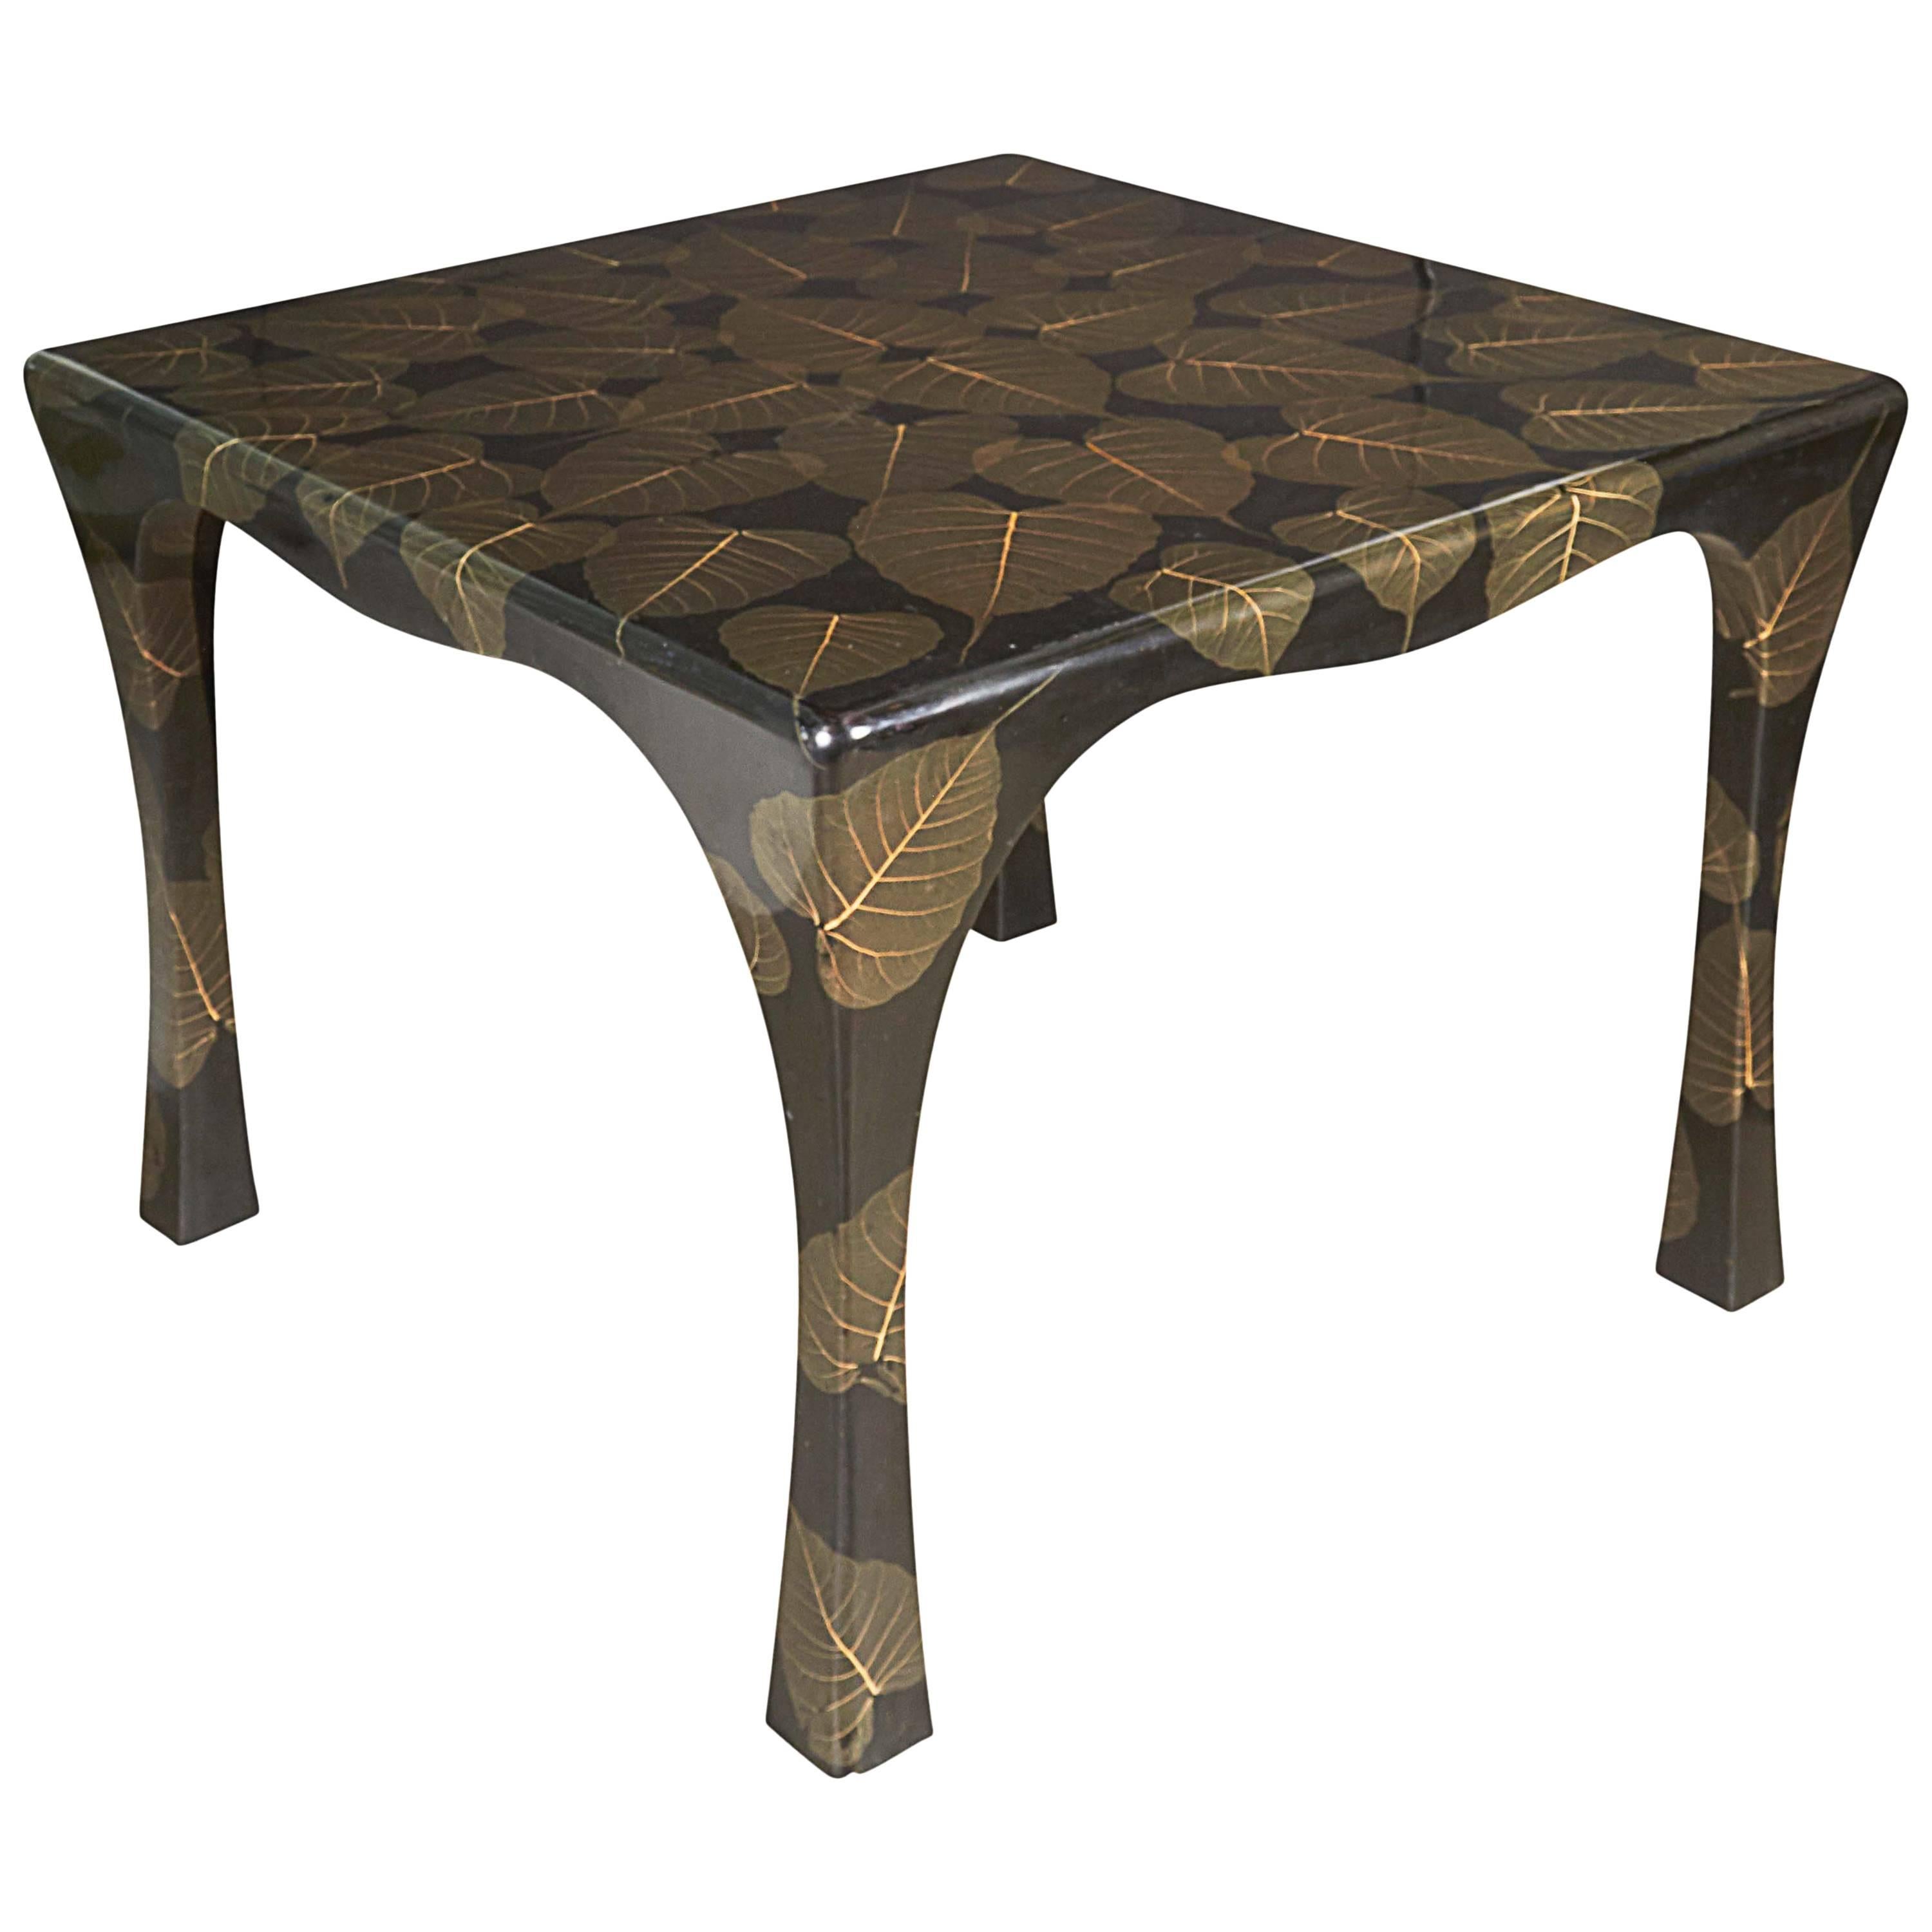 Mid-Century Modern Asian Inspired Black Lacquer Card Table with Leaf Motif